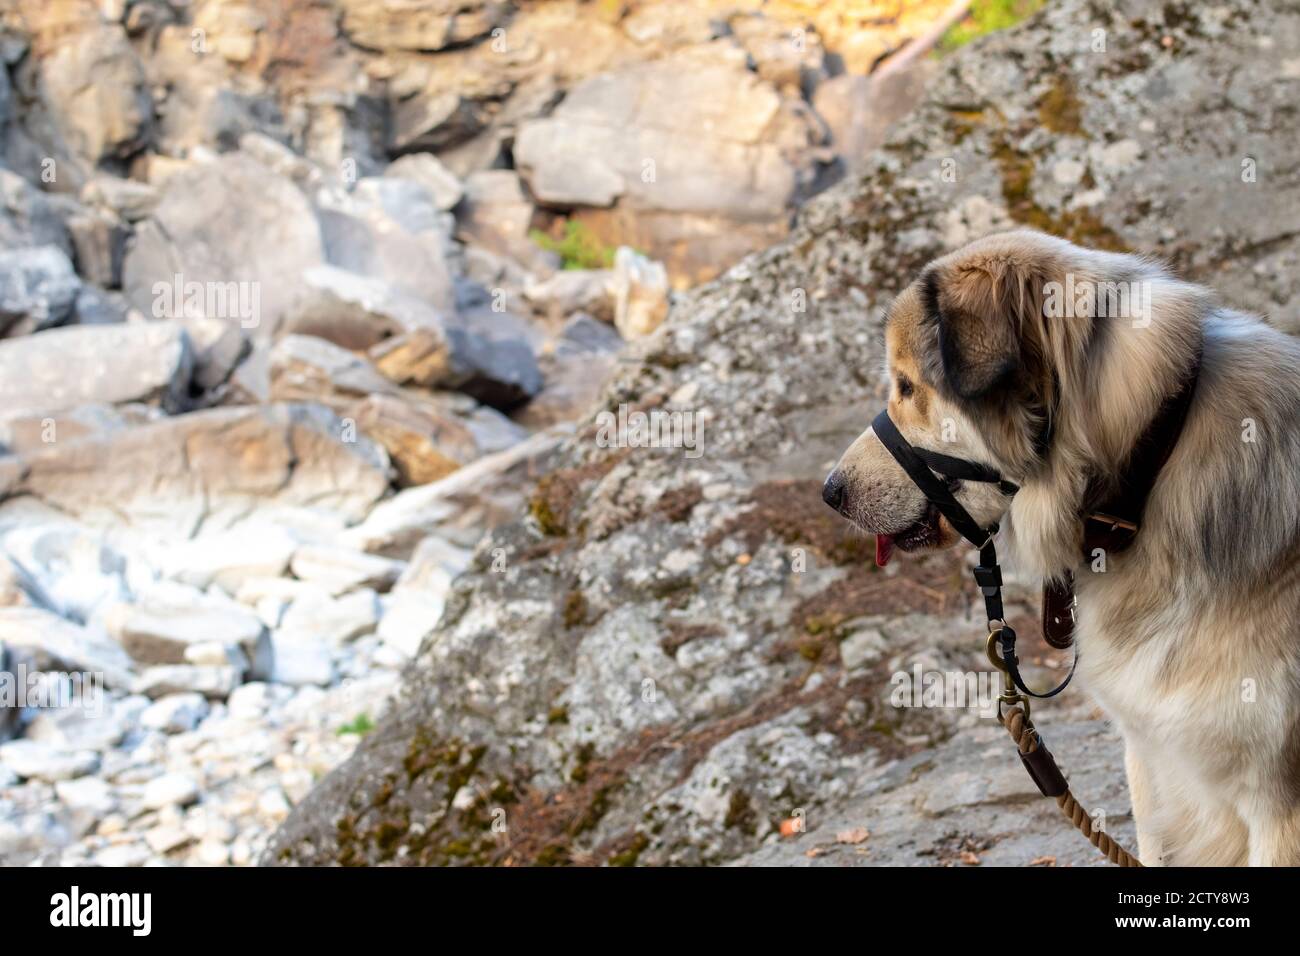 An Anatolian Dog with a muzzle and leash looks down into a canyon. Stock Photo